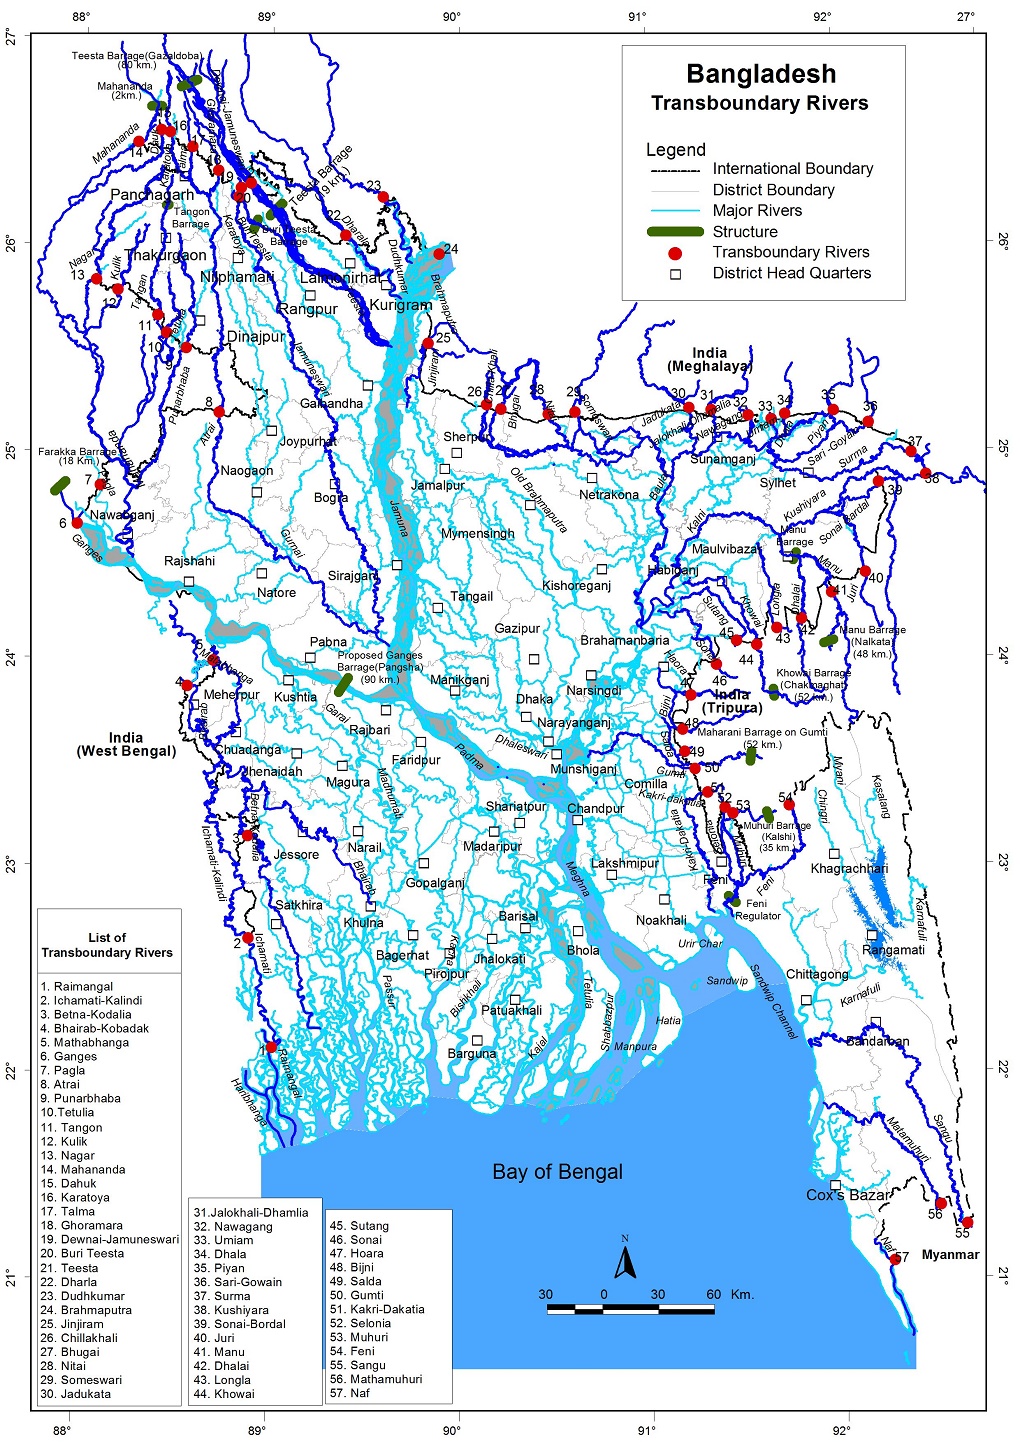 Bangladesh's shared rivers [image by the Joint Rivers Commission, Bangladesh]